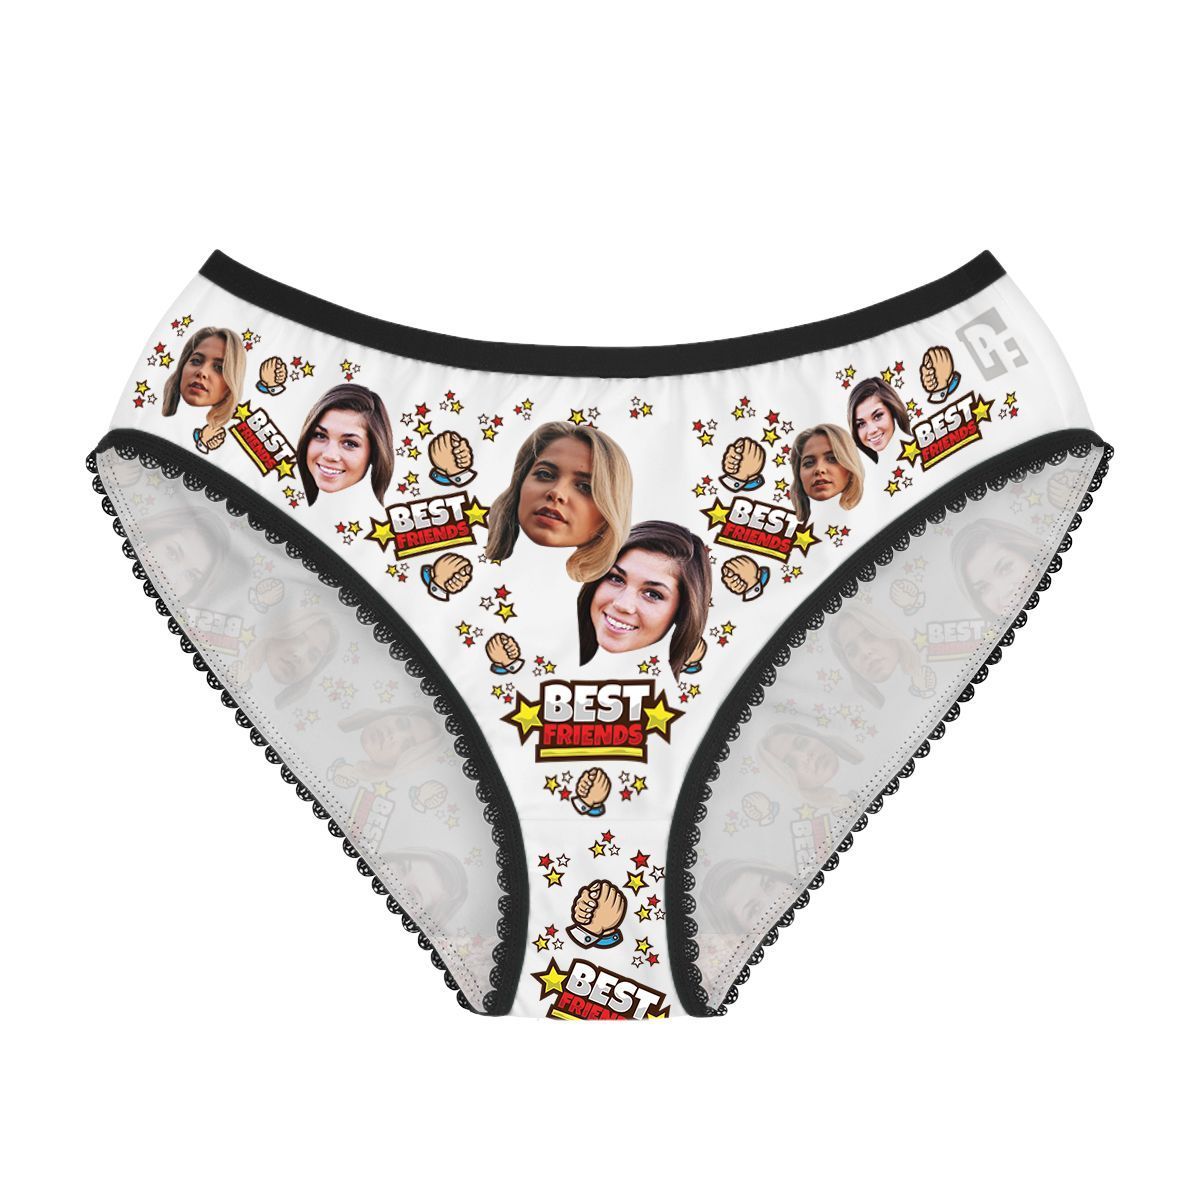 White Best Friends women's underwear briefs personalized with photo printed on them